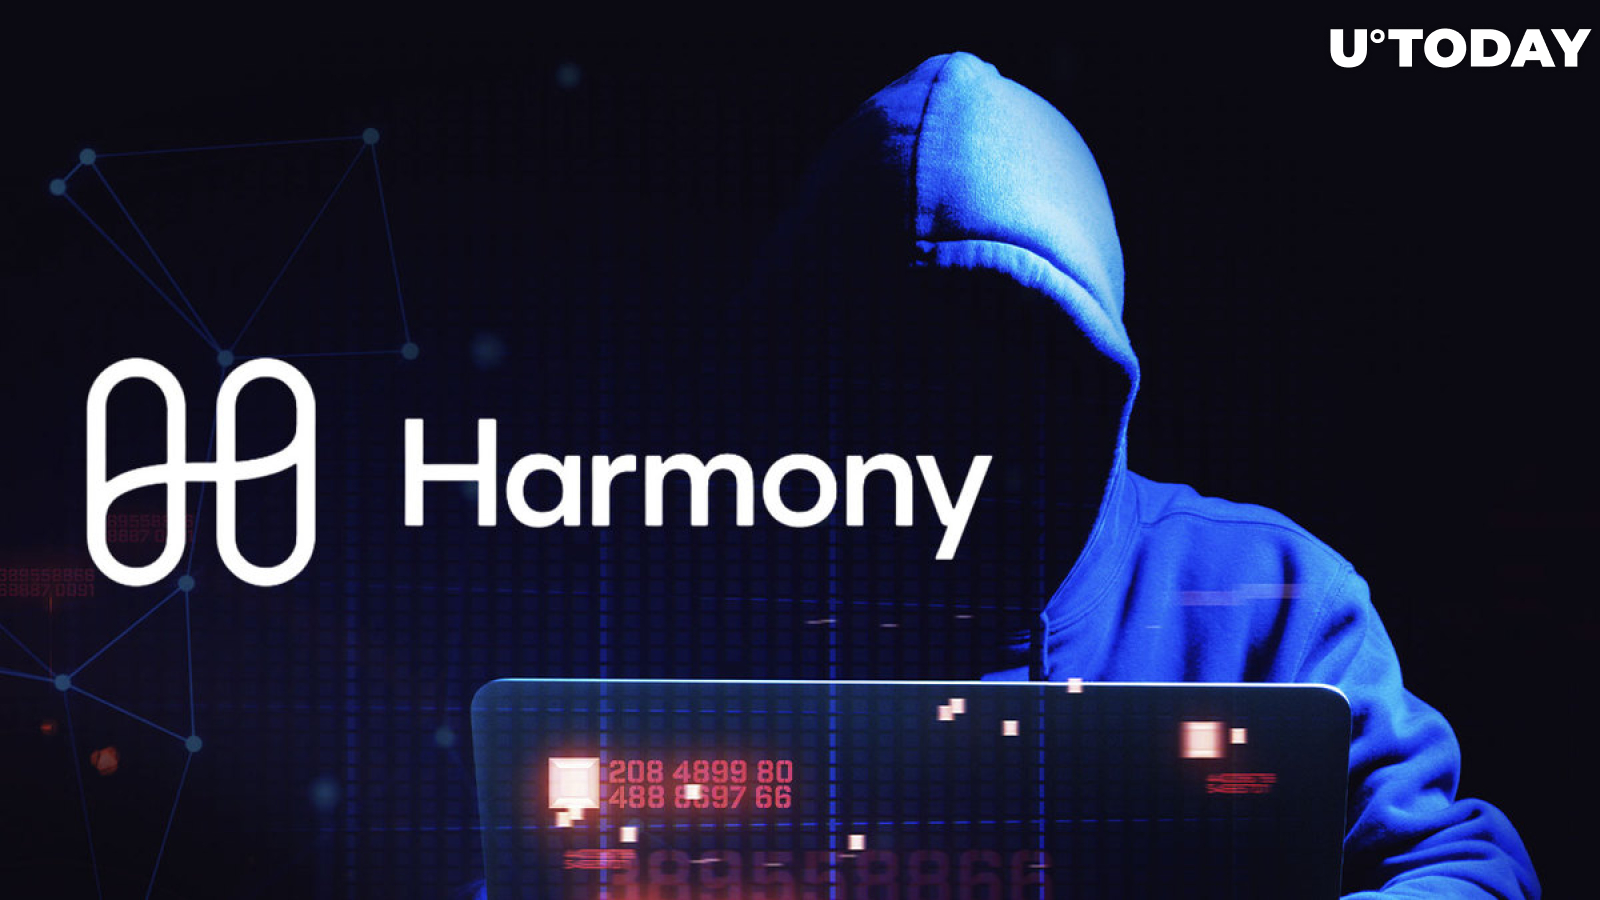 Notorious Hacker Group Lazarus Begins Laundering Harmony Funds: Details